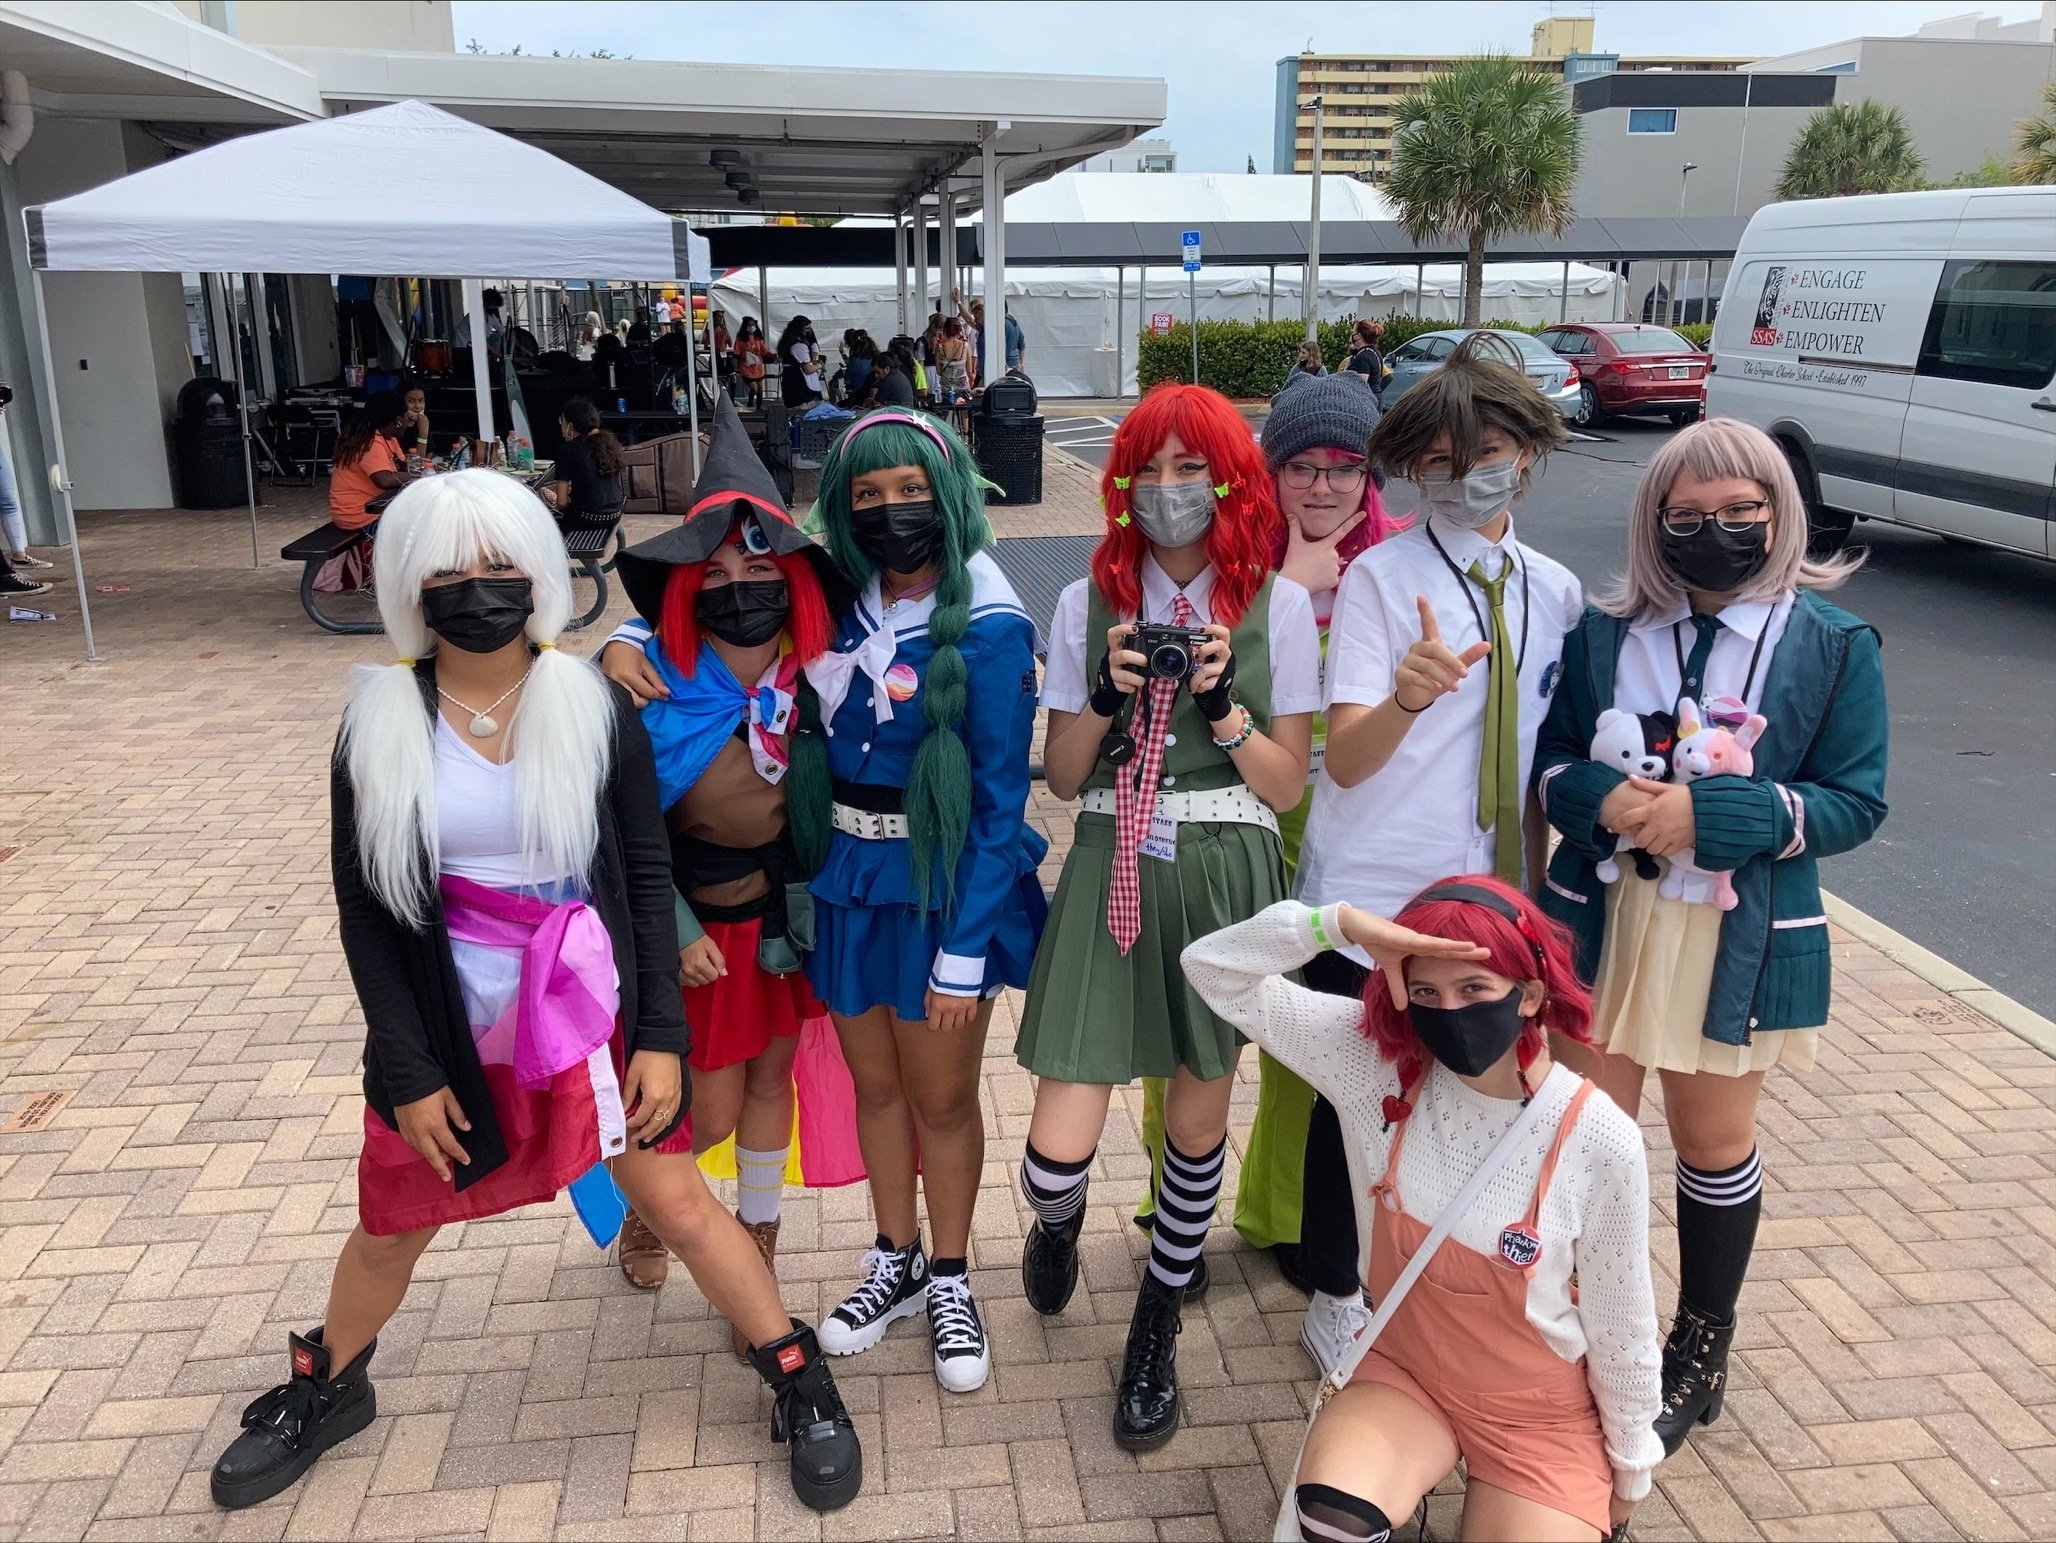 Ft LAUDERDALE FL  JULY 14 2018 Anime comic book and electronic gaming  fans portray their favorite animated characters during the 13th annual  Florida Supercon at the Greater Ft Lauderdale Convention Center